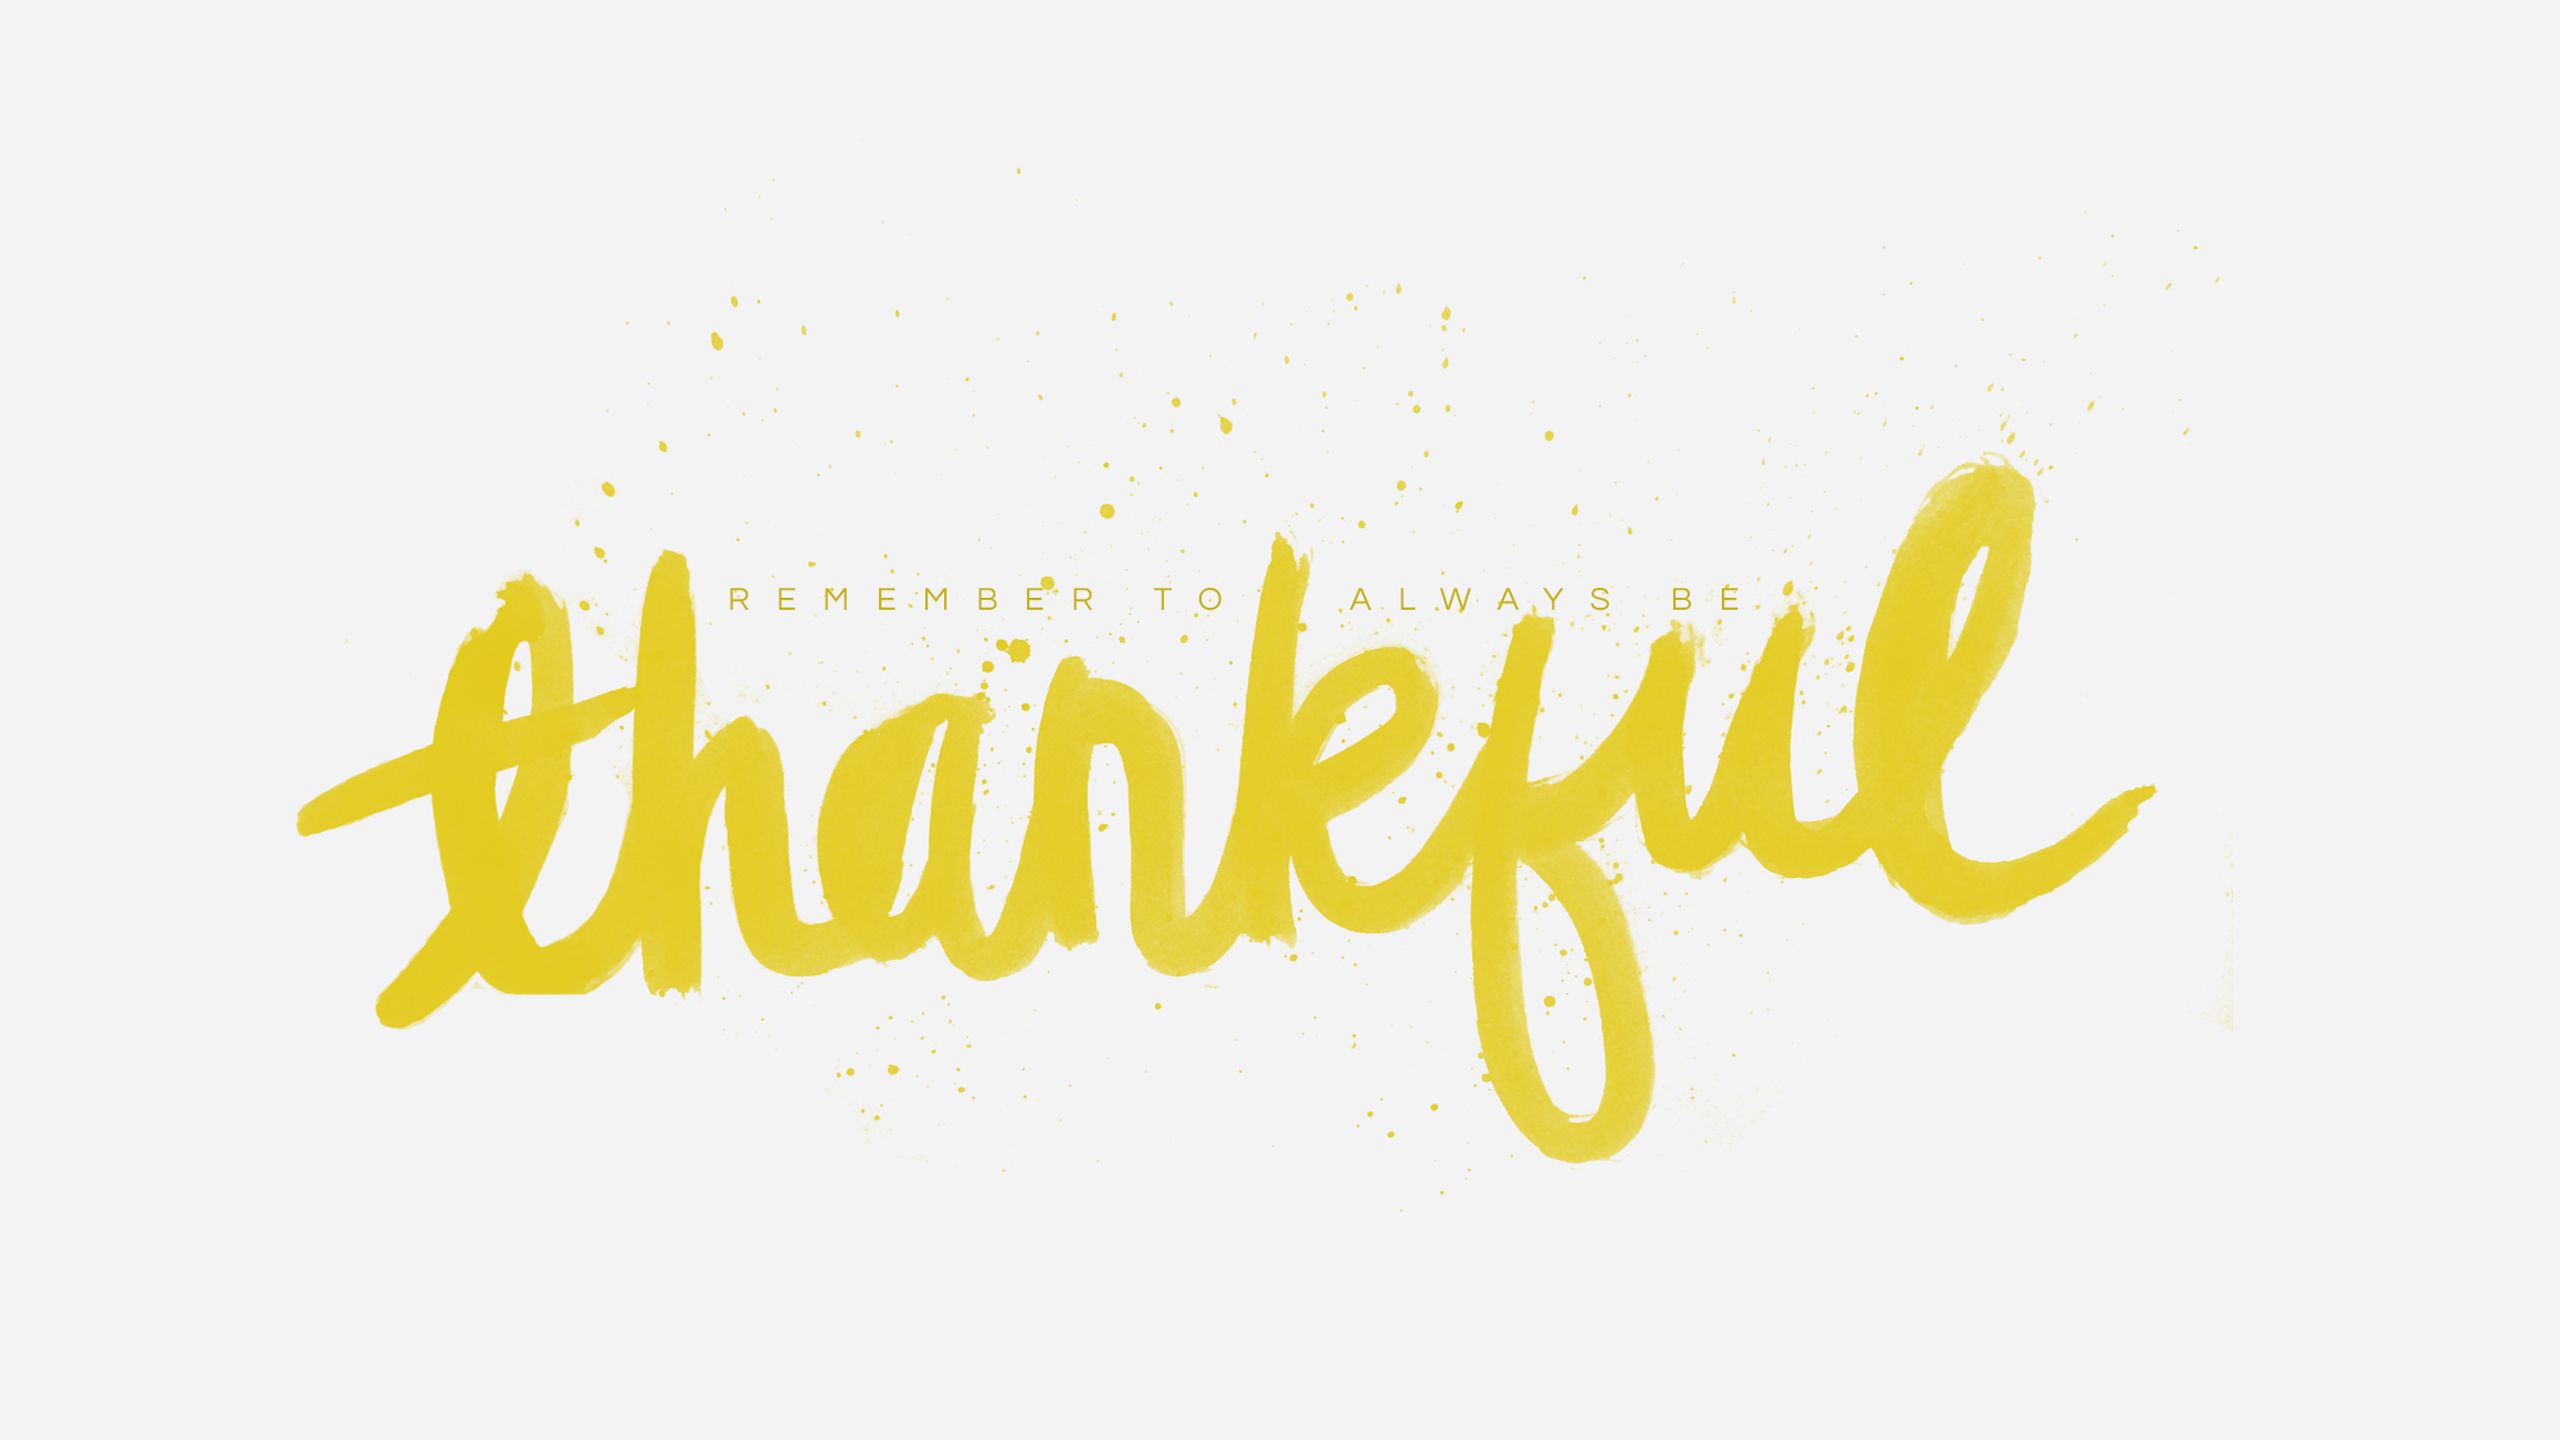 Thankful Wallpaper Top Background